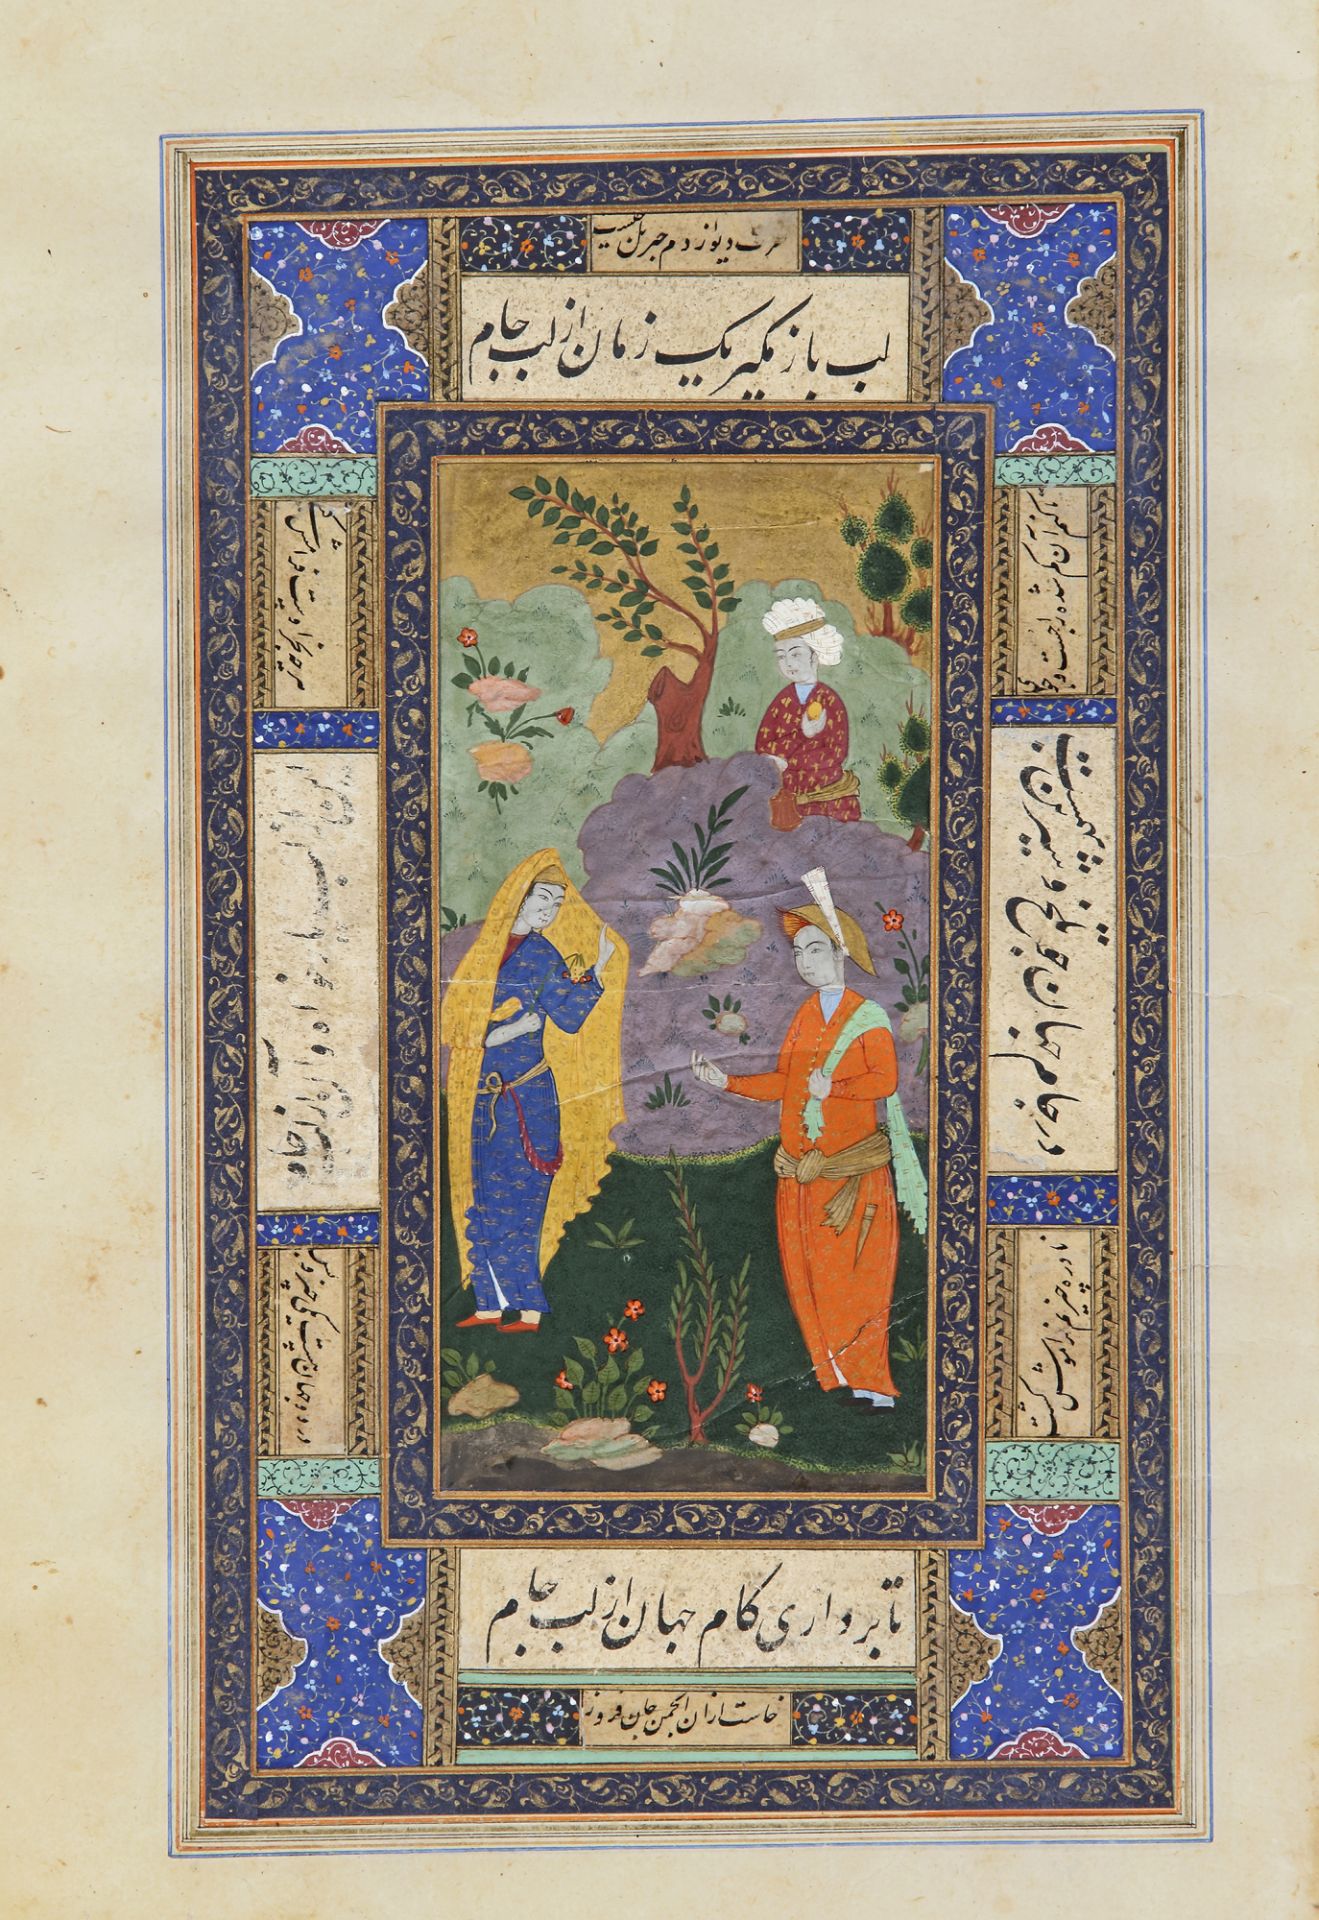 A PERSIAN DOUBLE-SIDED MINIATURE, ISFAHAN SCHOOL, 18TH CENTURY - Image 4 of 4